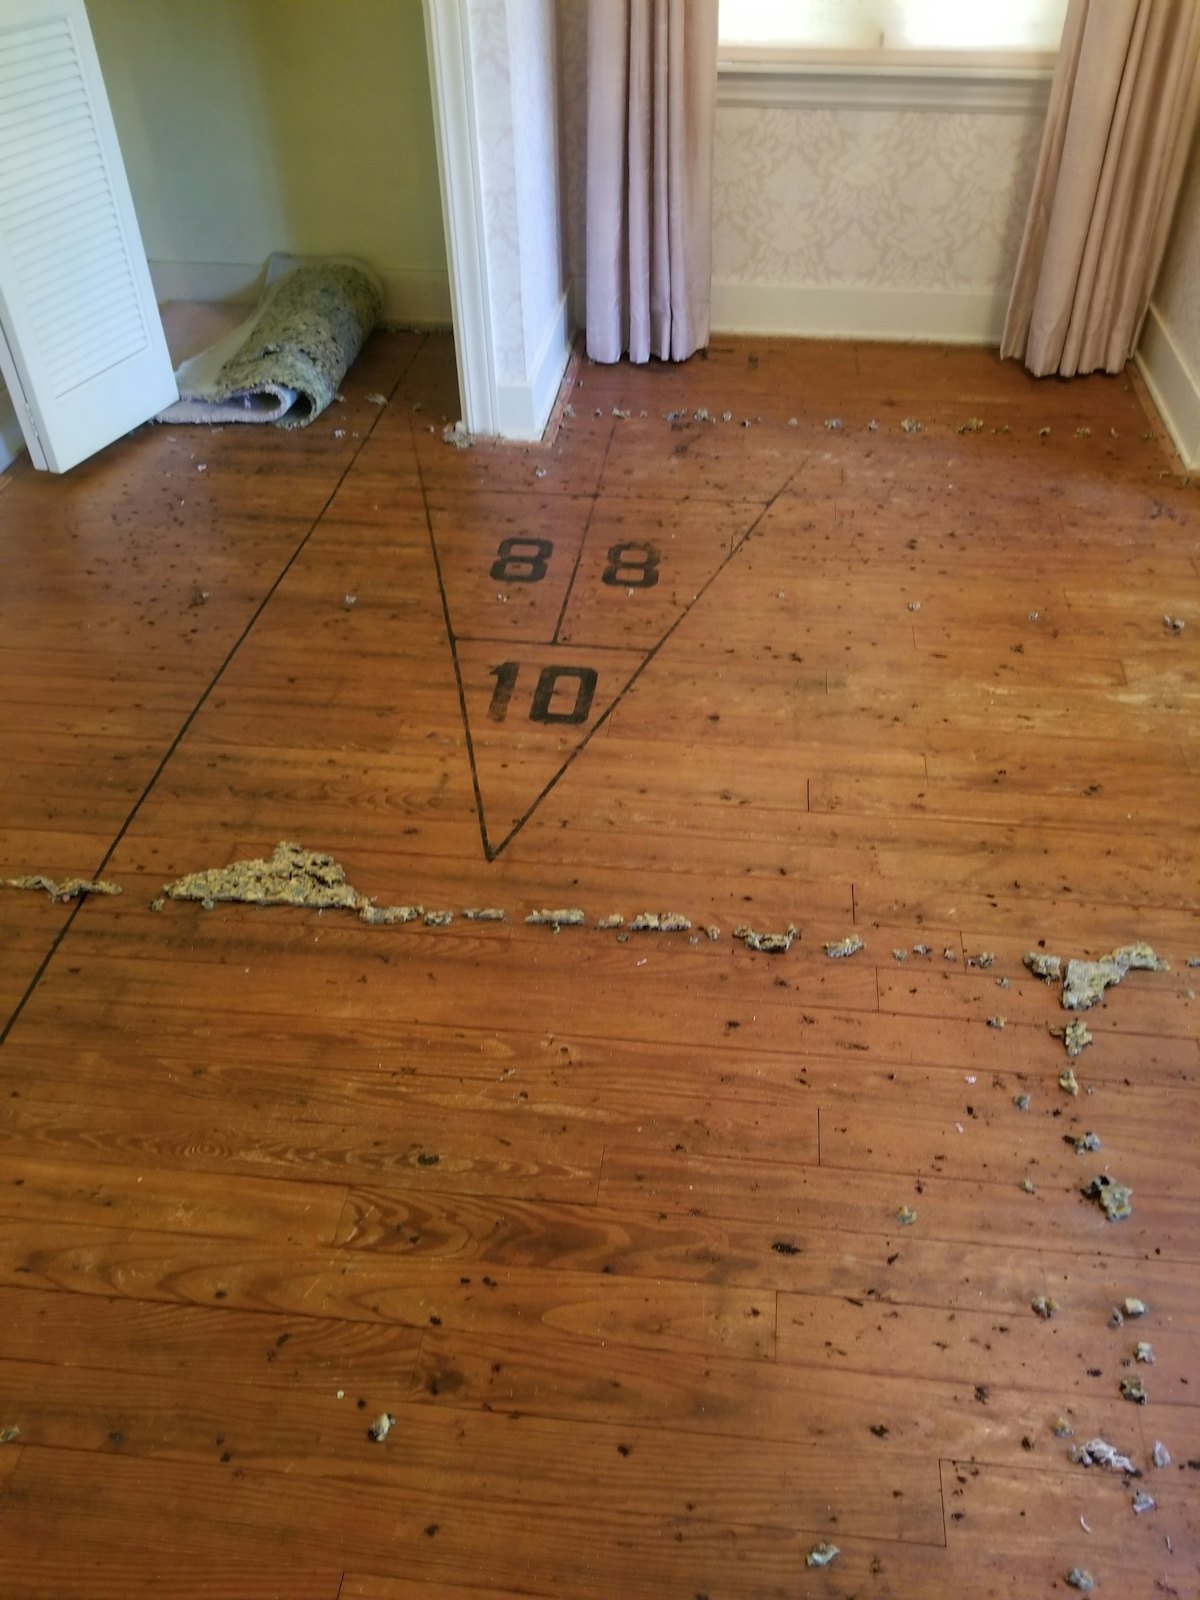 We pulled up carpet in new home and made horrifying discovery